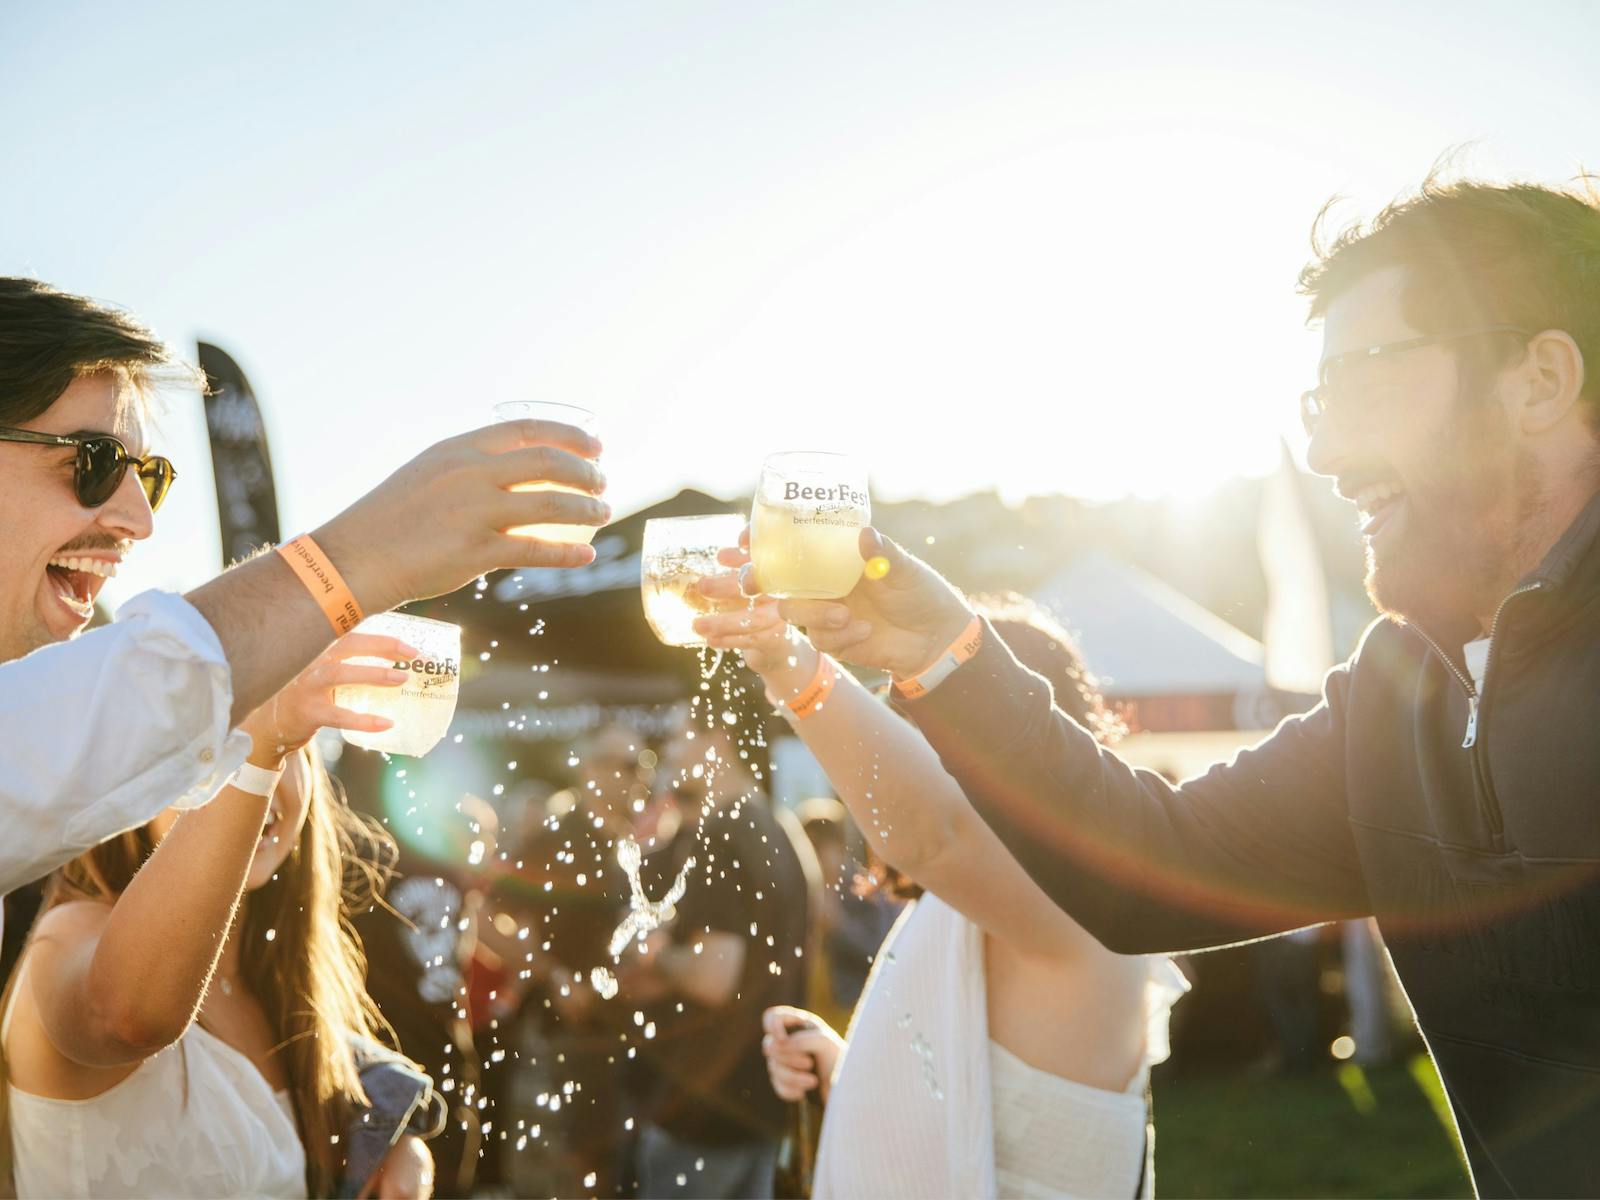 Enjoy a selection of over 200 craft beers, ciders, wines and cocktails with friends and family